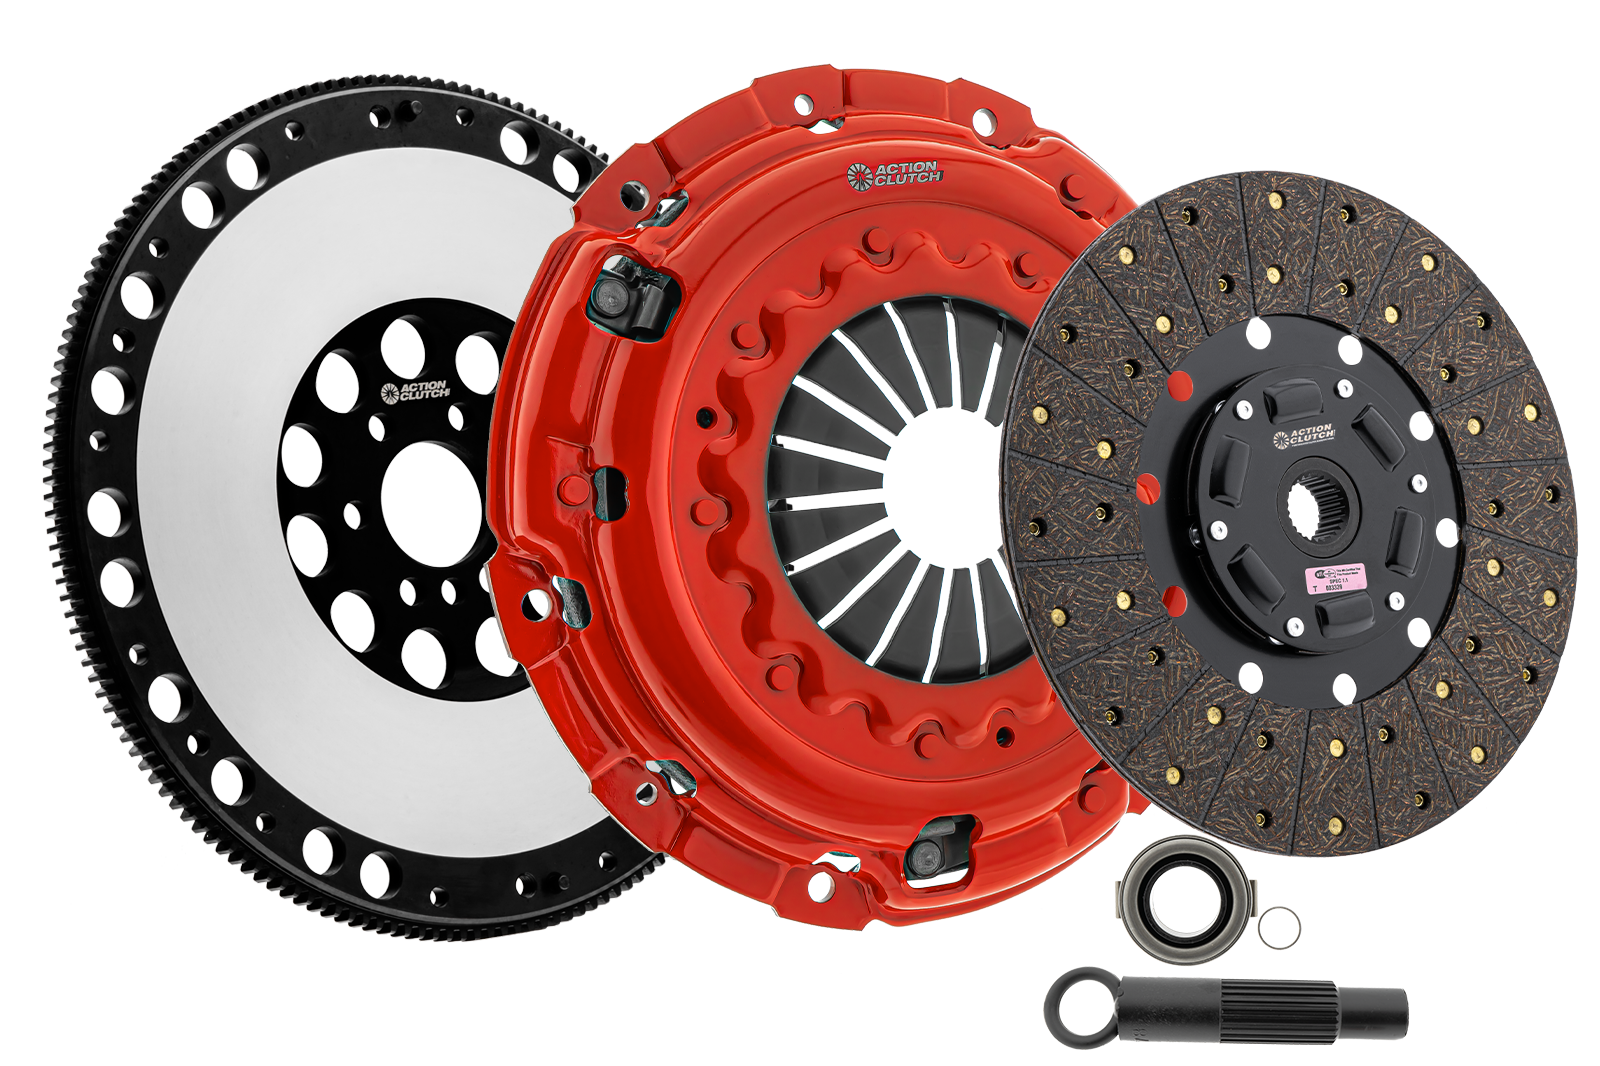 Stage 1 Clutch Kit (1OS) for Honda Civic SI 2002-2005 2.0L (K20A3) Includes Lightened Flywheel